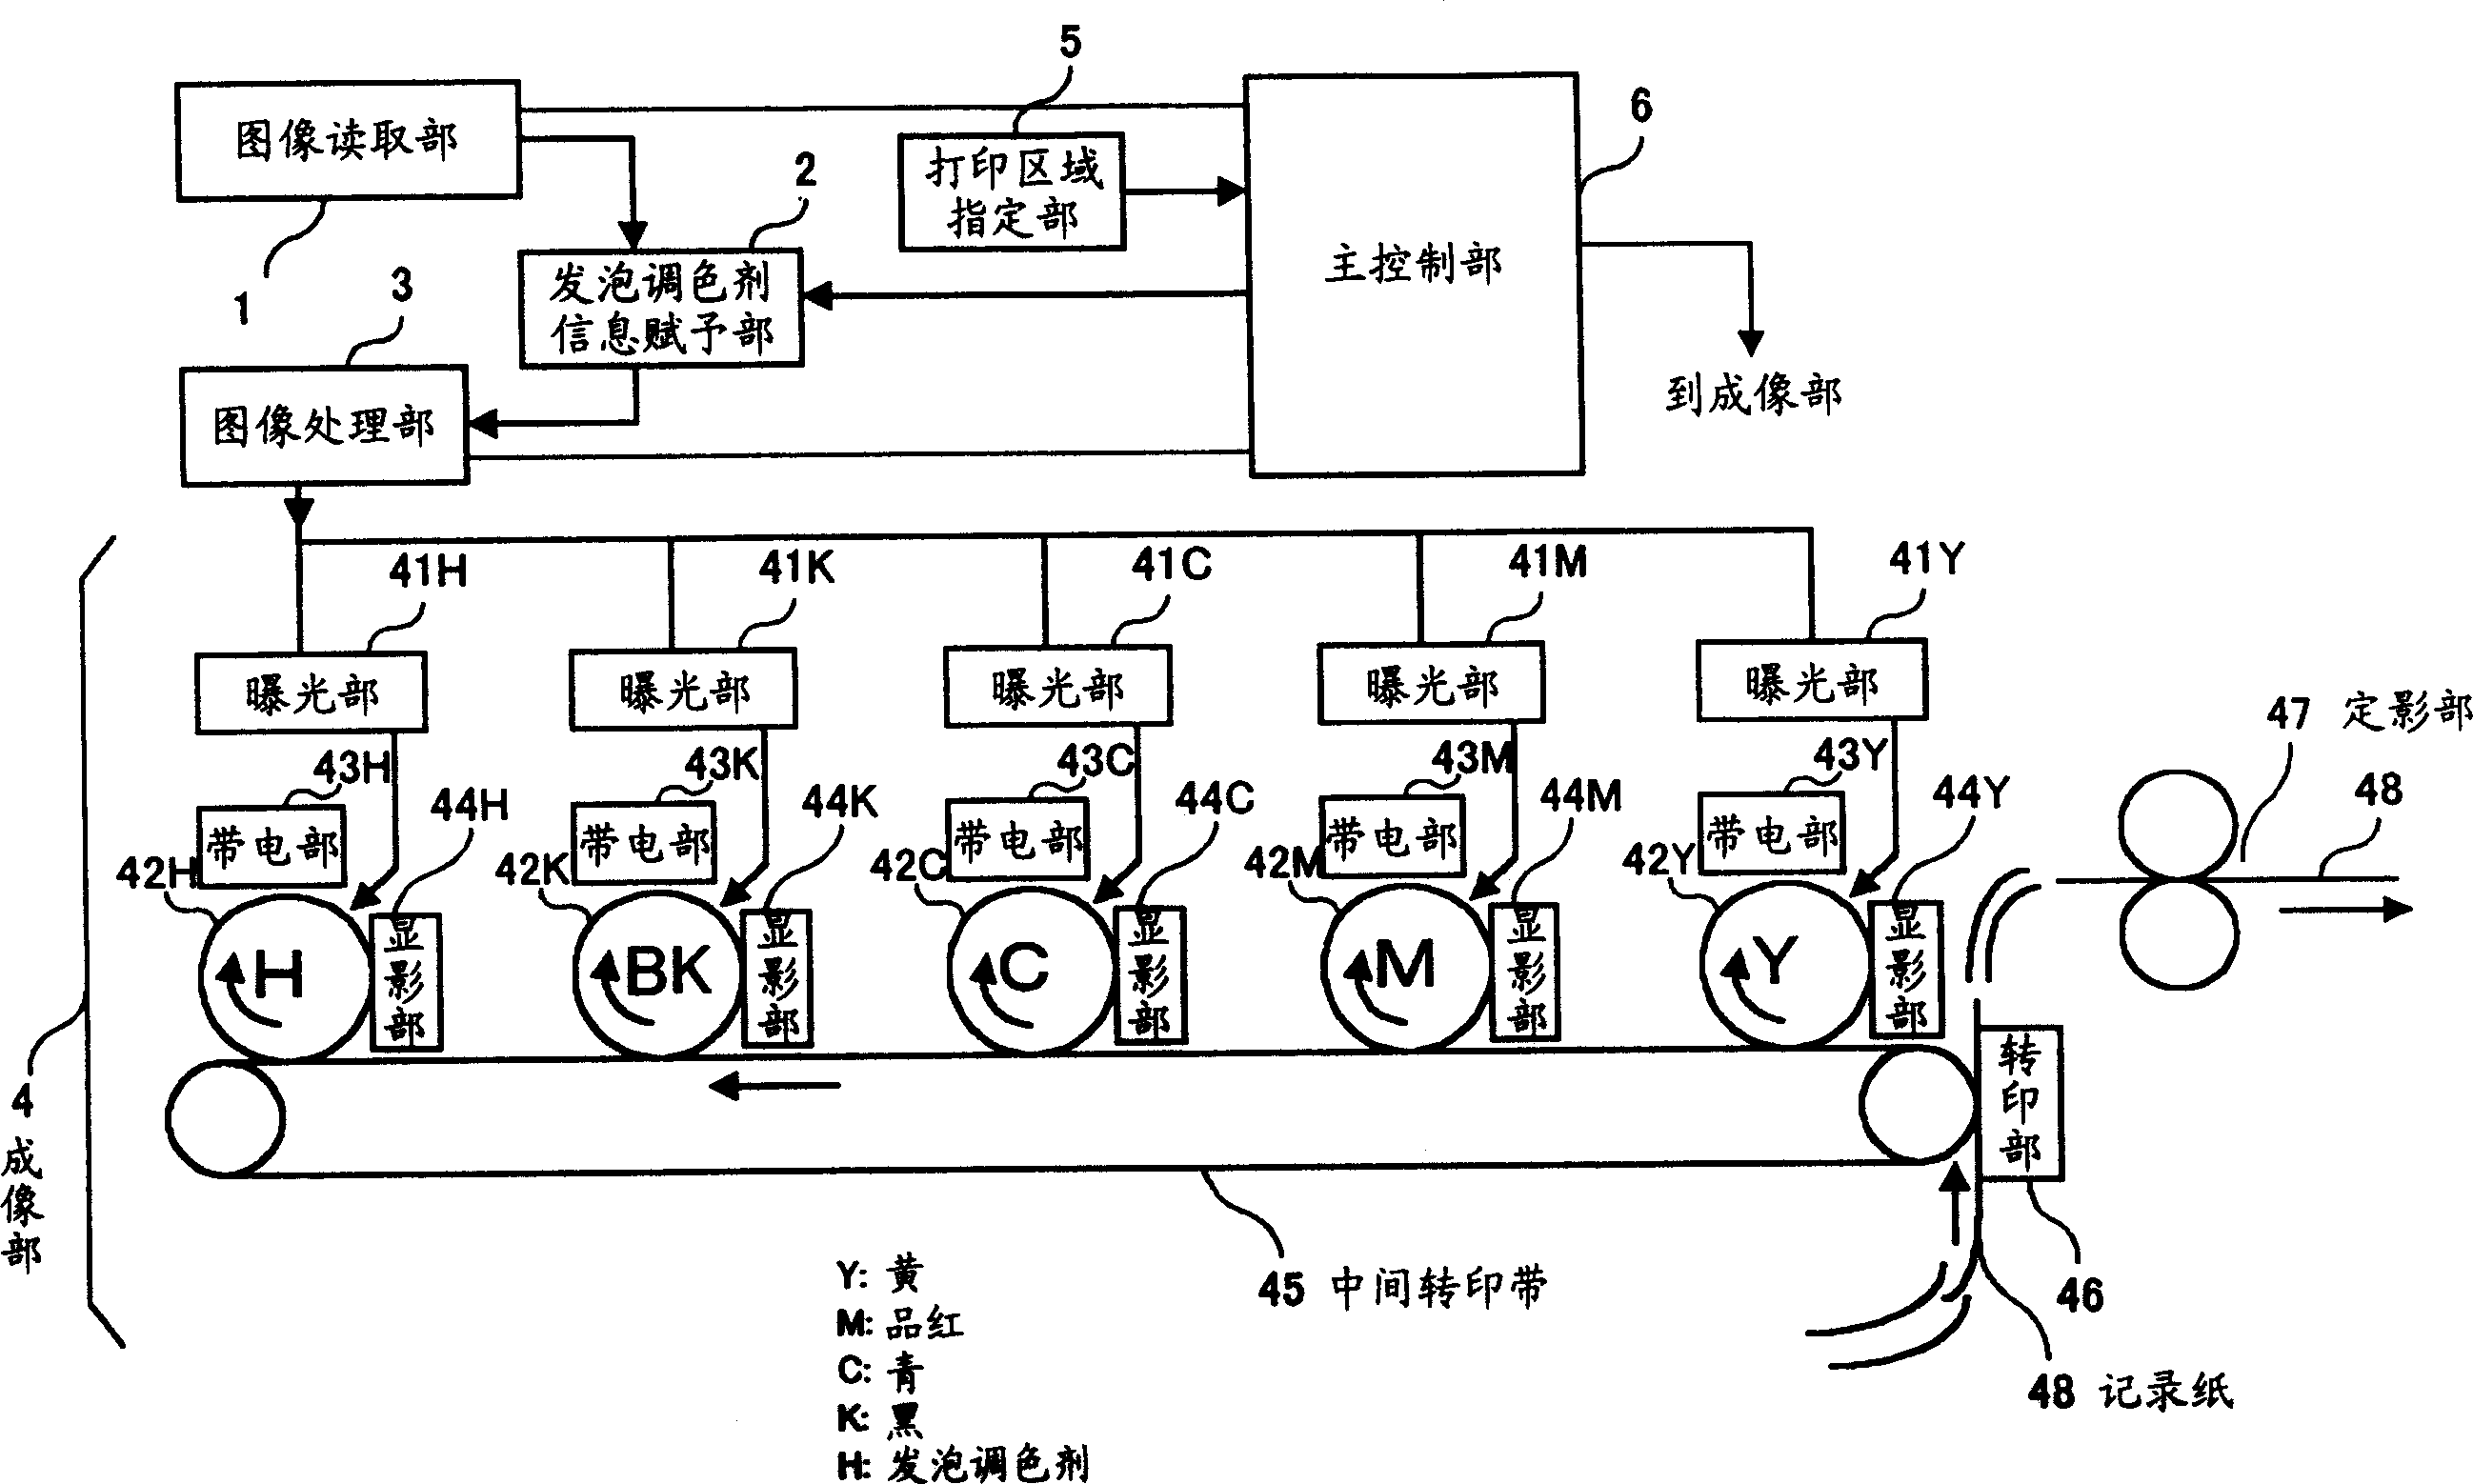 Imaging device, image processing device, imaging method and image processing method